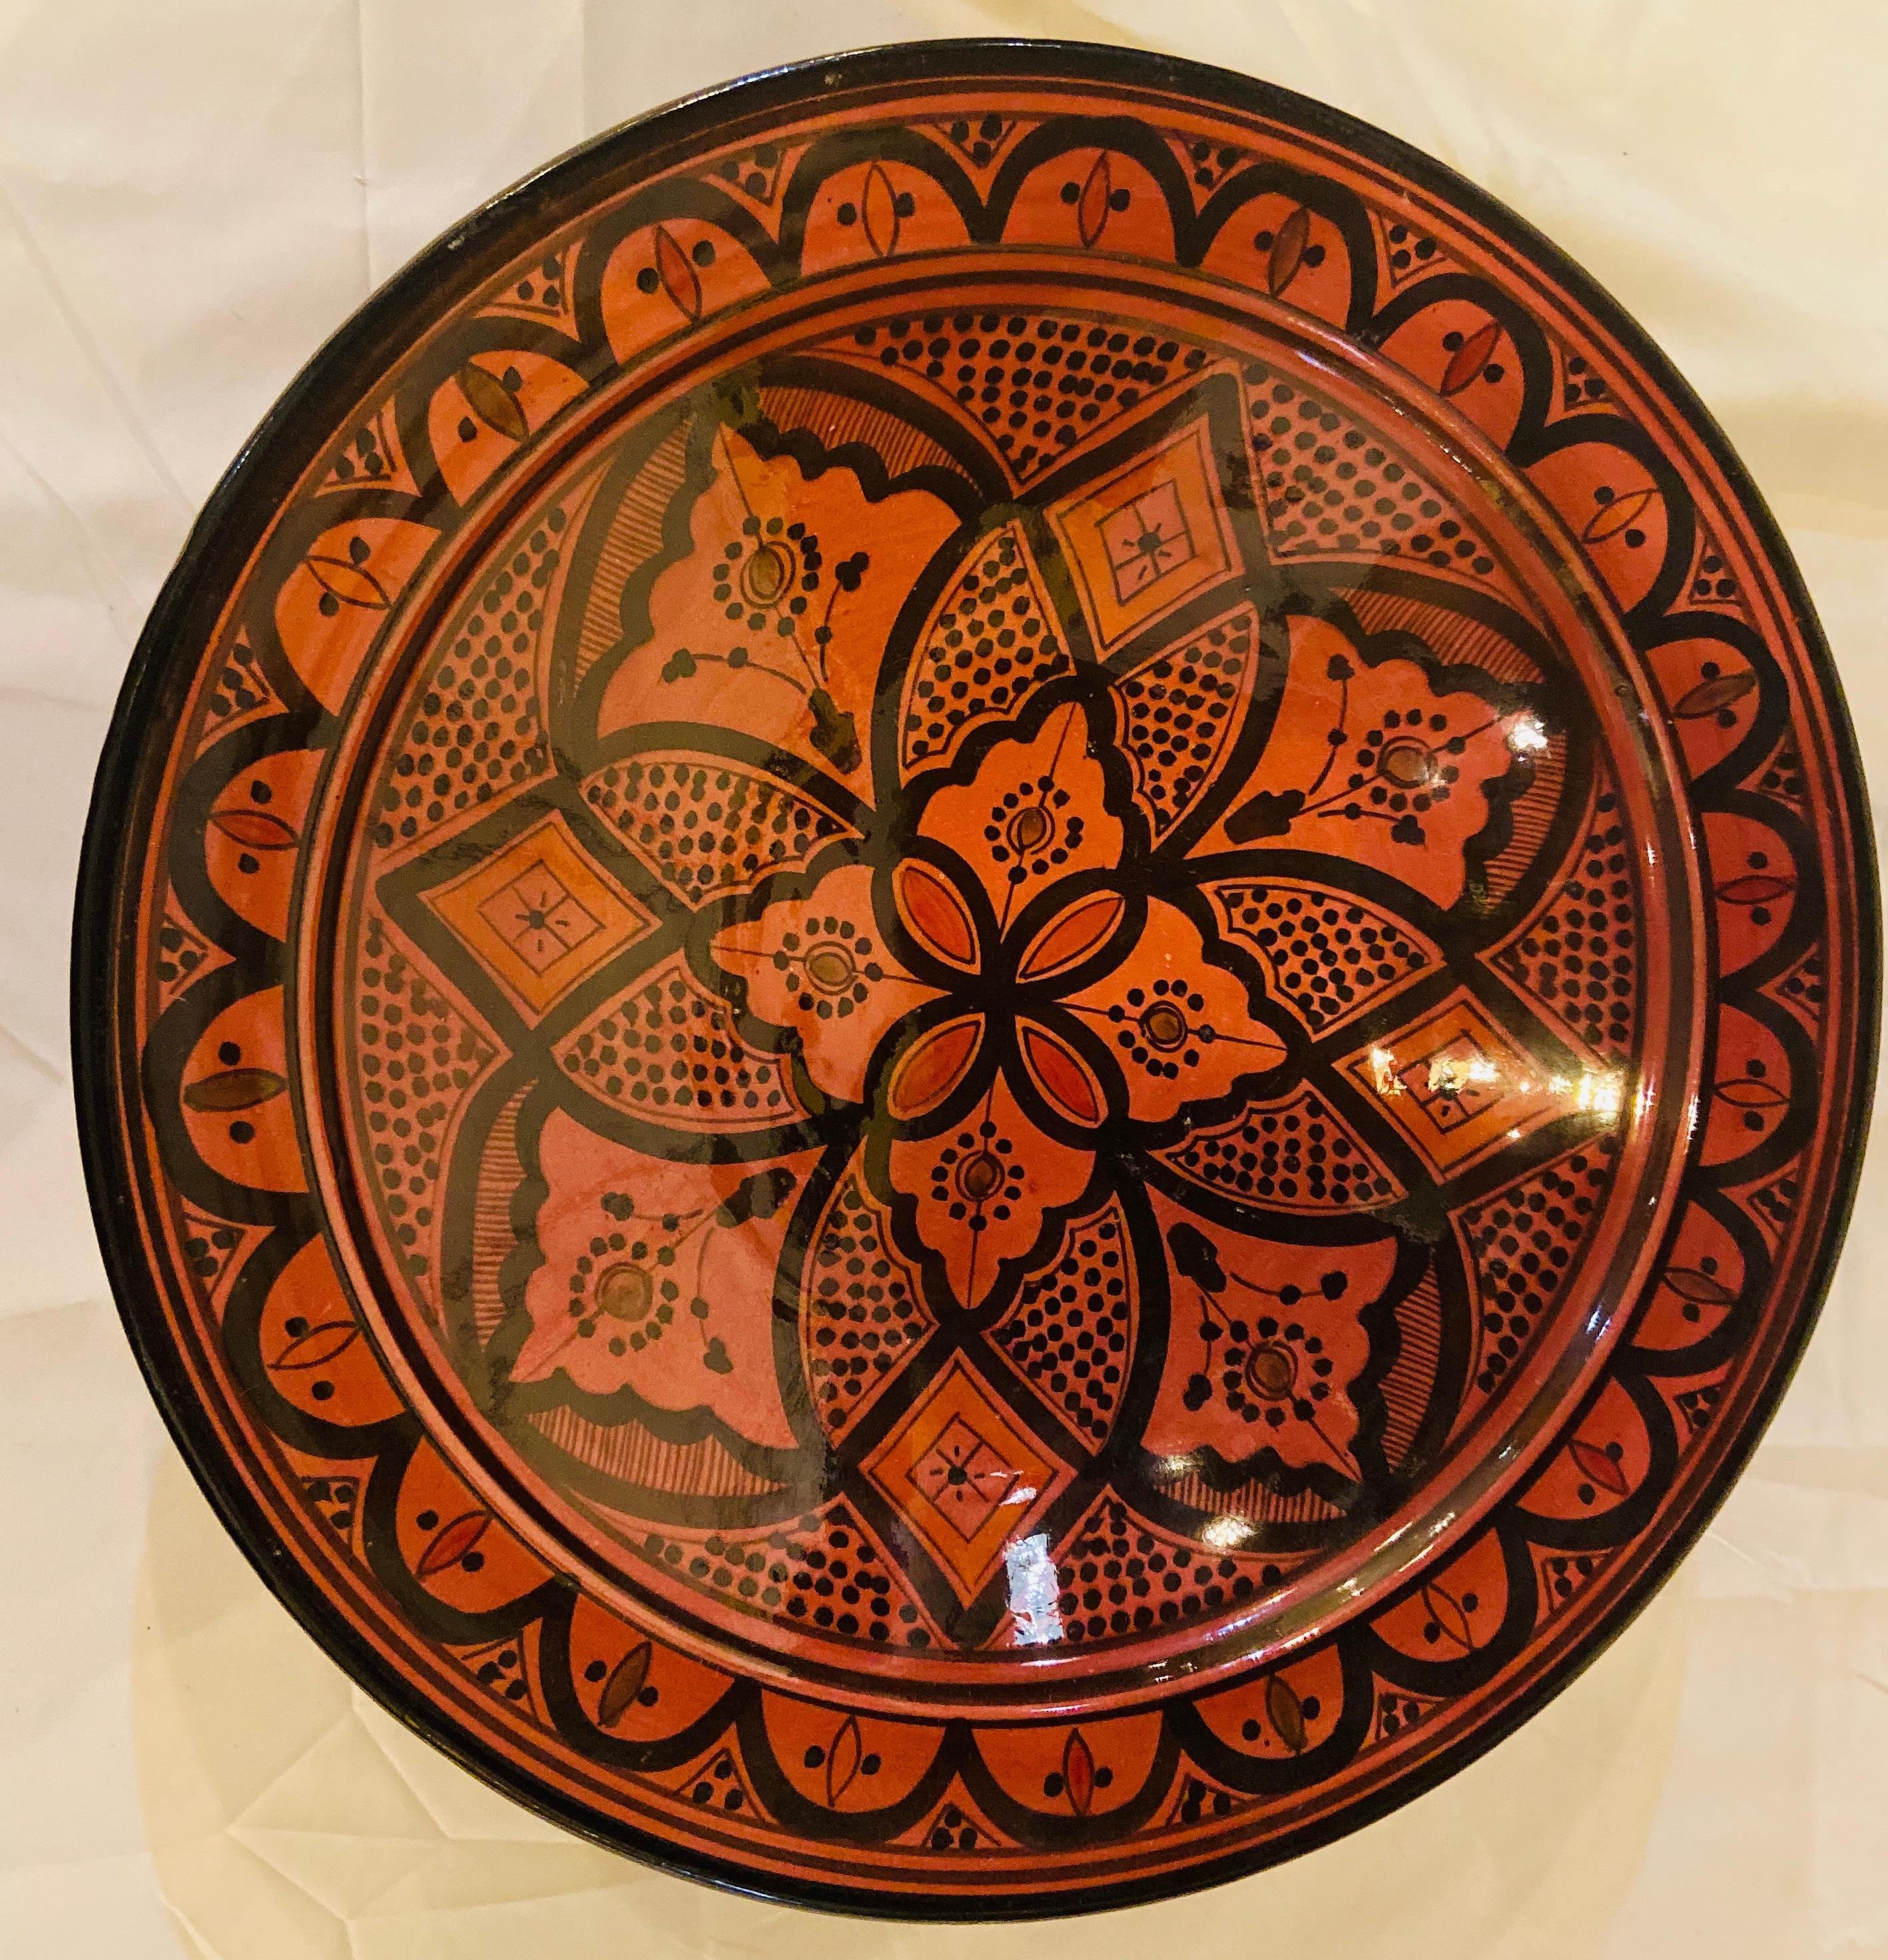 Contemporary Handmade Large Colorful Ceramic Serving Decorative, Center Table Plates